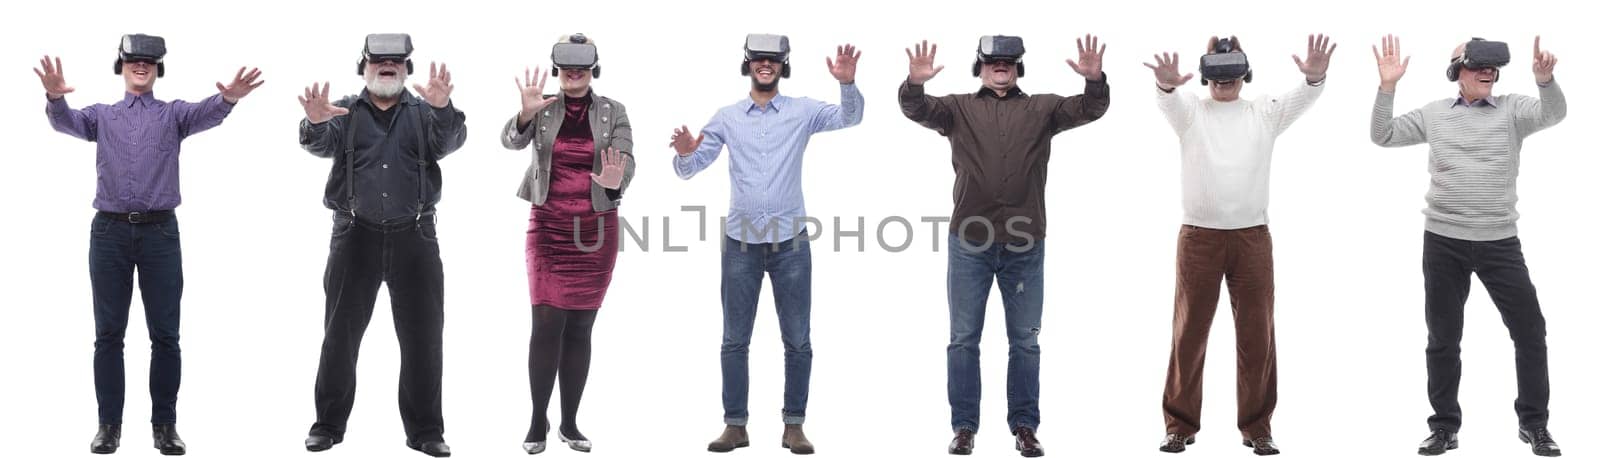 group of people with 3d glasses hands up isolated on white background